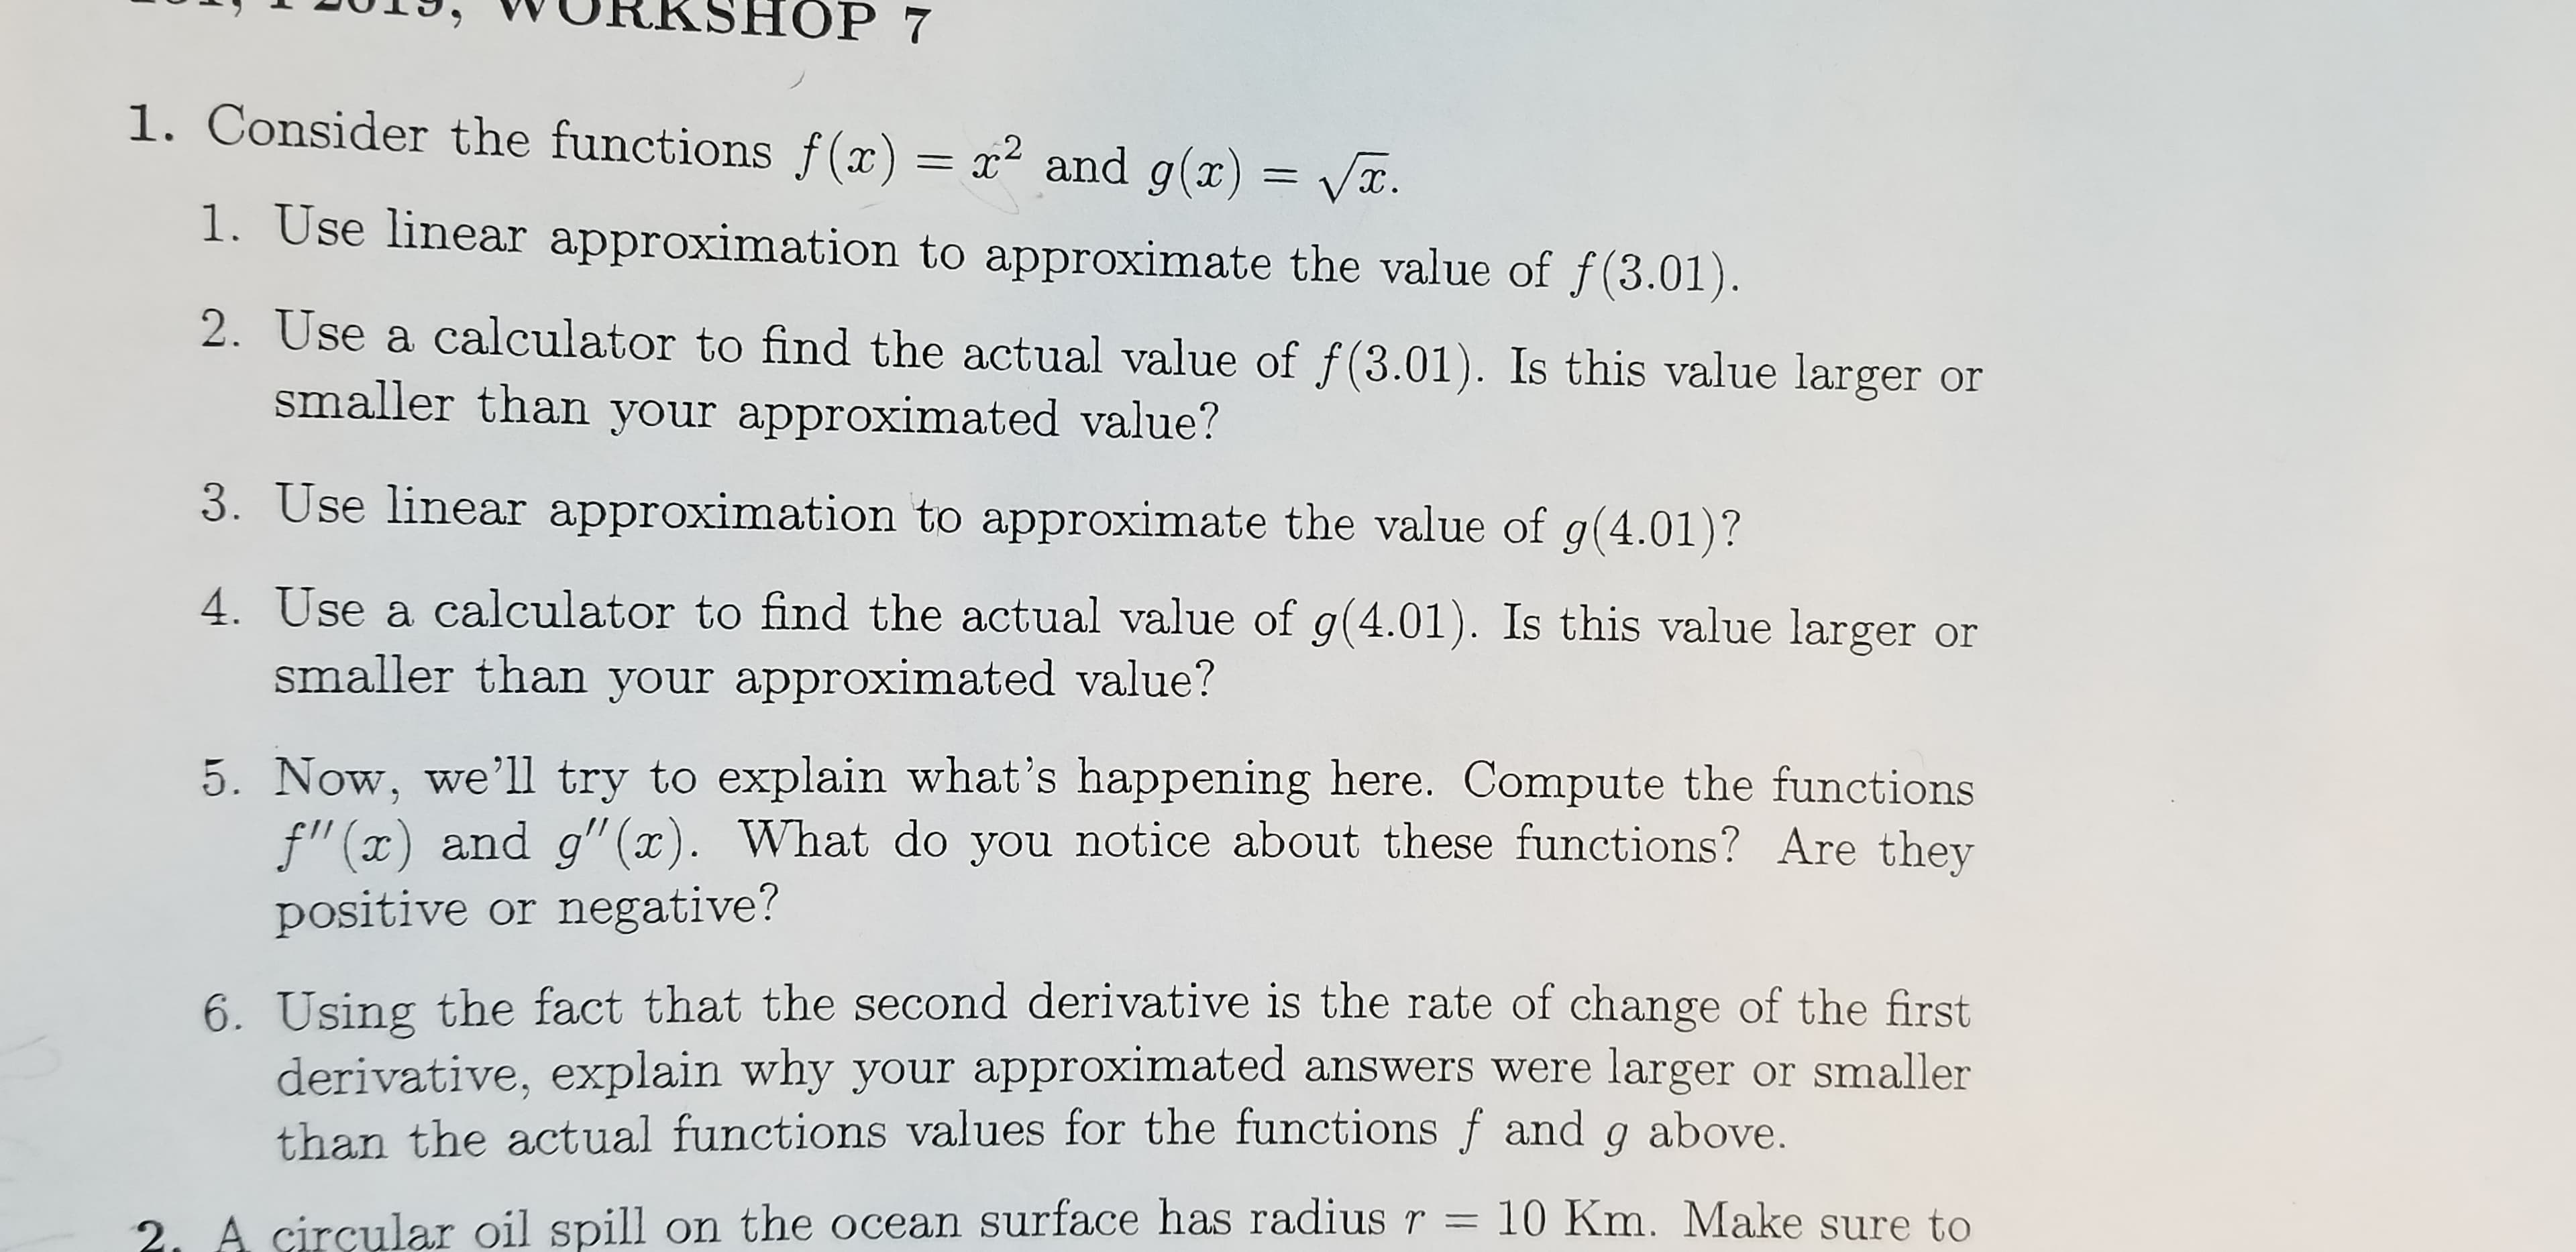 ОP 7
1. Consider the functions f(x) = x2 and g(x) = Vx.
1. Use linear approximation to approximate the value of f(3.01).
2. Use a calculator to find the actual value of f(3.01). Is this value larger or
smaller than your approximated value?
3. Use linear approximation to approximate the value of g(4.01)?
4. Use a calculator to find the actual value of g(4.01). Is this value larger or
smaller than your approximated value?
5. Now, we'll try to explain what's happening here. Compute the functions
f"(x) and g"(x). What do you notice about these functions? Are they
positive or negative?
6. Using the fact that the second derivative is the rate of change of the first
derivative, explain why your approximated answers were larger or smaller
than the actual functions values for the functions f and g above.
2. A circular oil spill on the ocean surface has radius r = 10 Km. Make sure to
